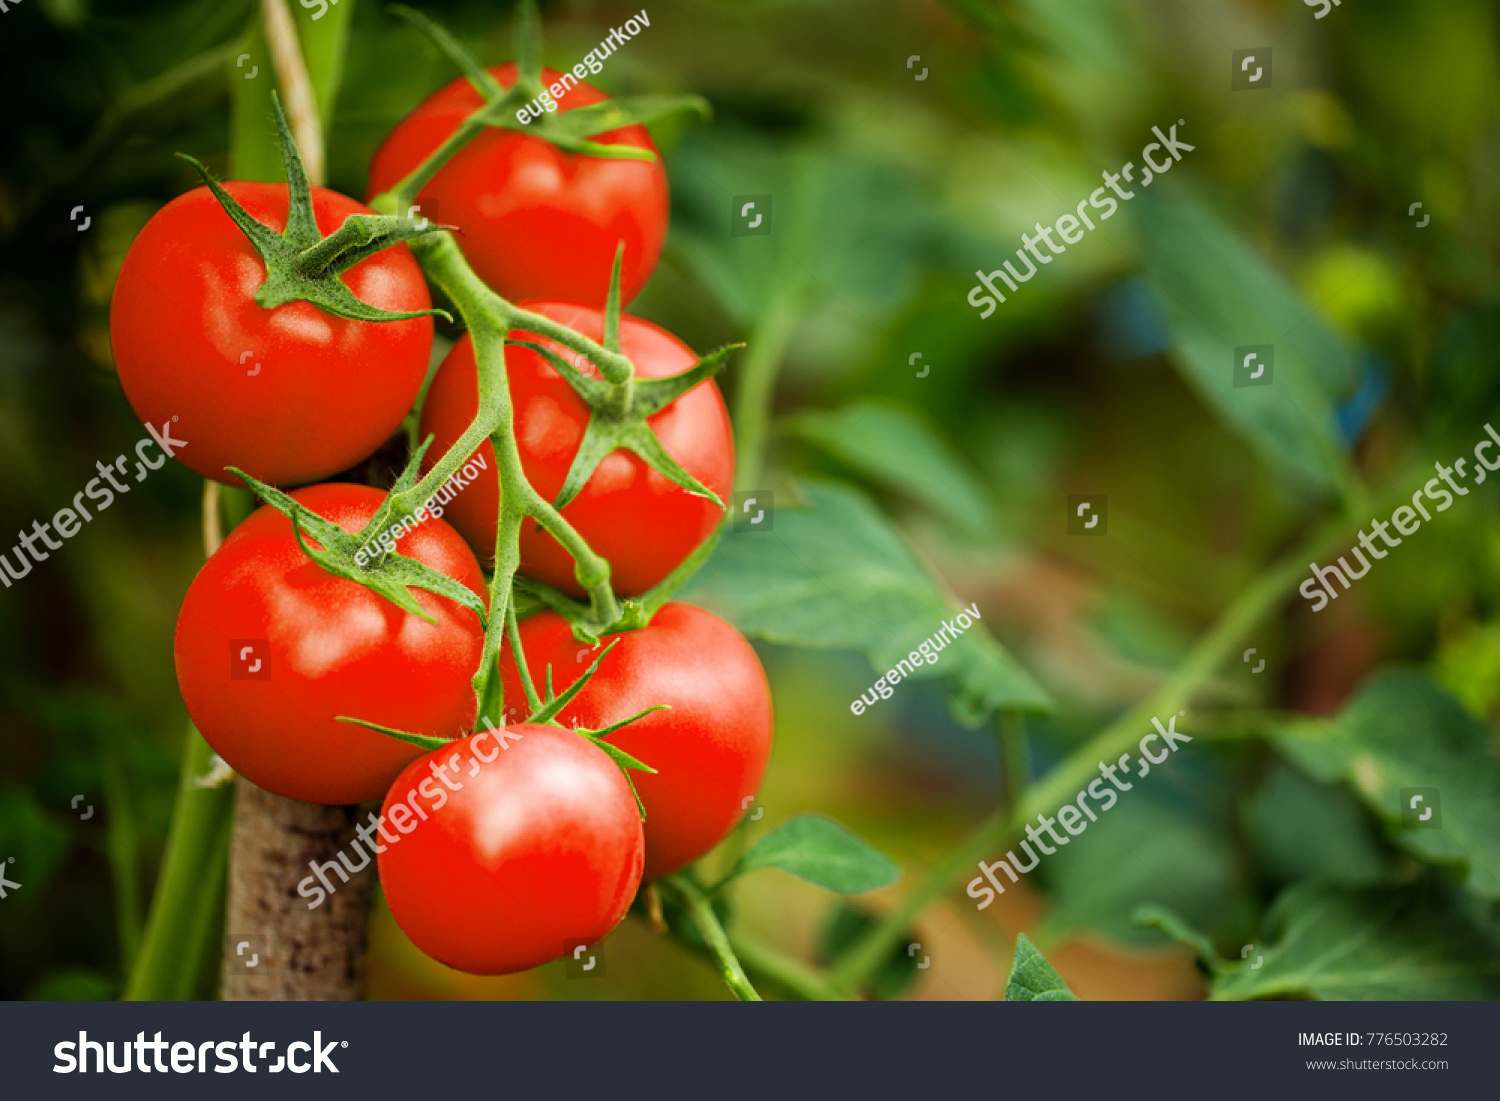 Ripe tomato plant growing in greenhouse. Tasty red heirloom tomatoes. Blurry background and copy space #776503282